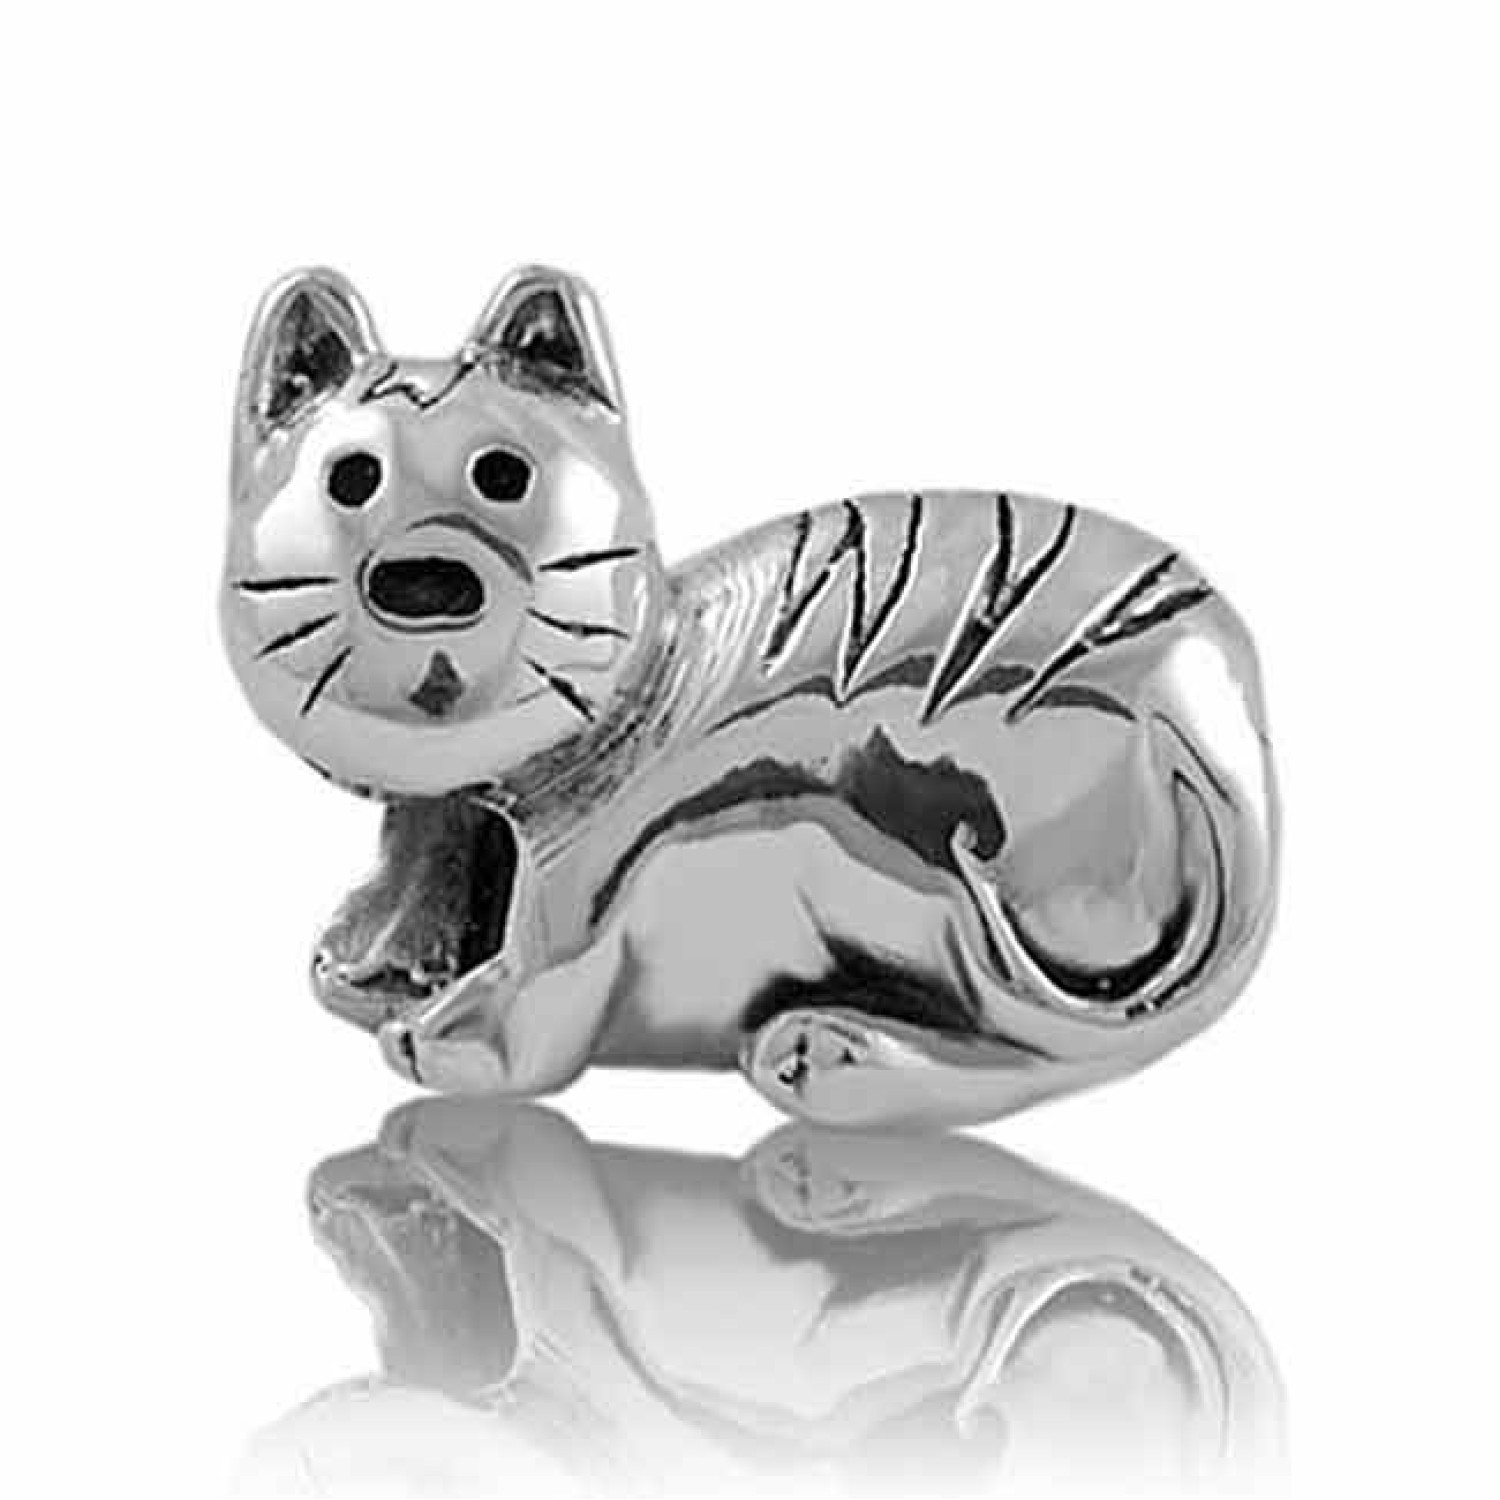 LK099 NZ Cat. A local New Zealand pet! Sterling Silver Christies exclusive 5 year guarantee compatible with all other major brands Bracelets But not compatible with Lovelinks Bracelets (Non Universal Type) @christies.online